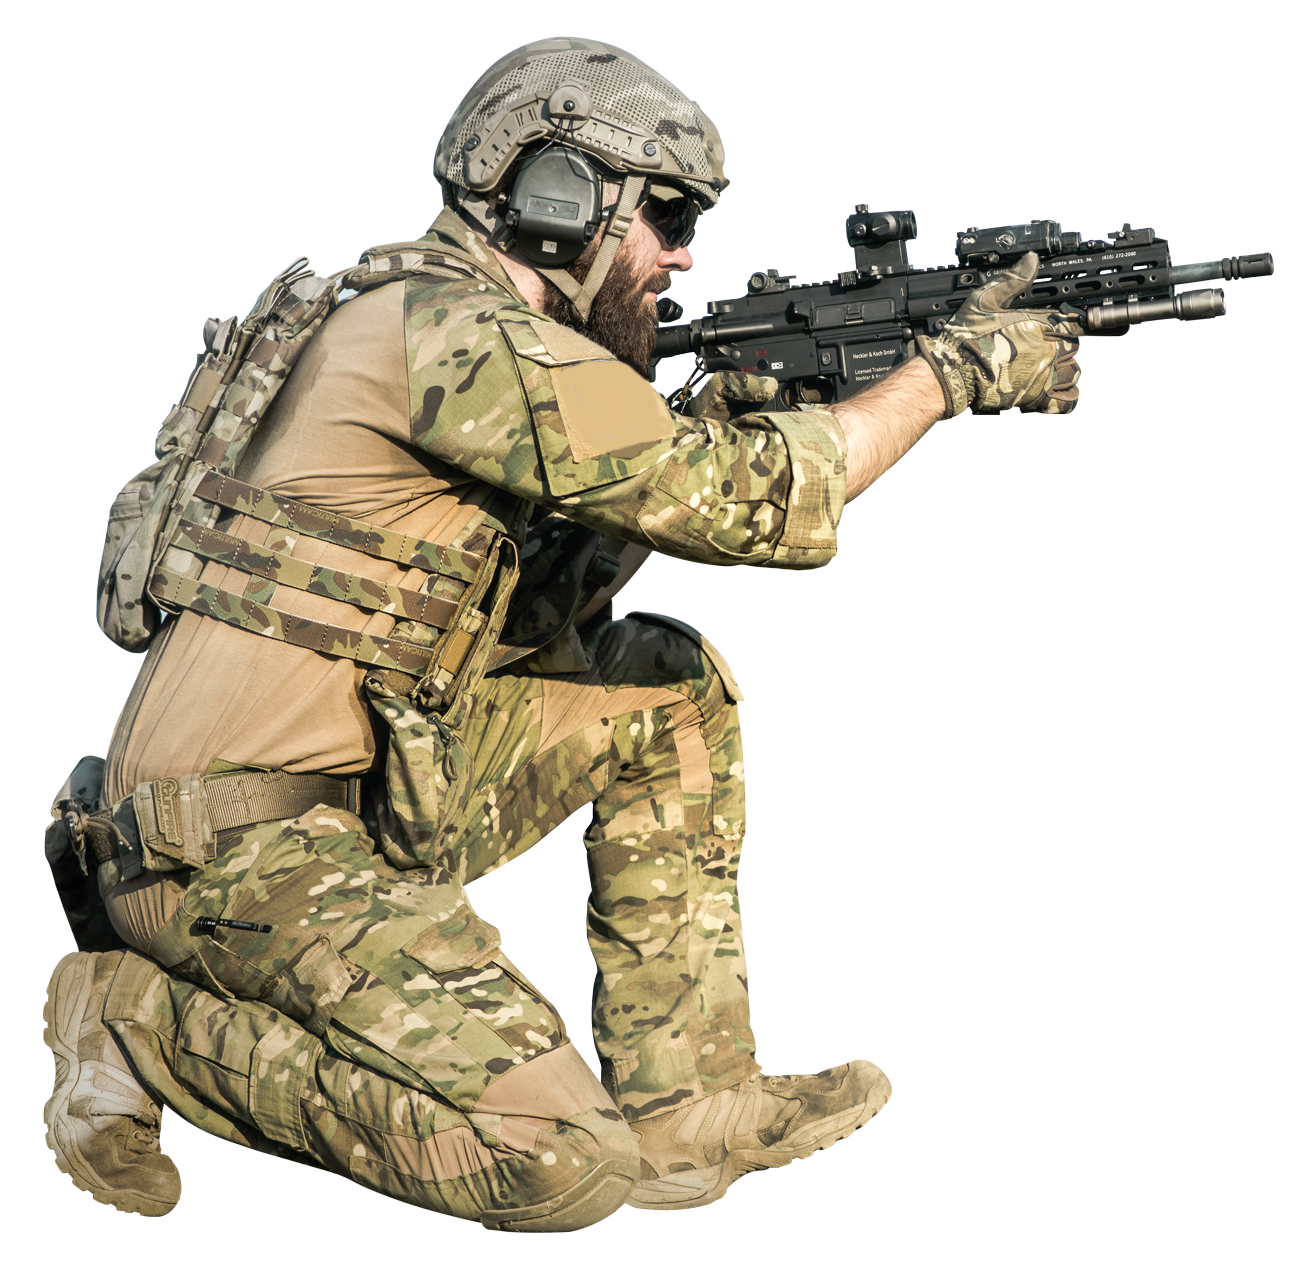 Soldier holding assault rifle